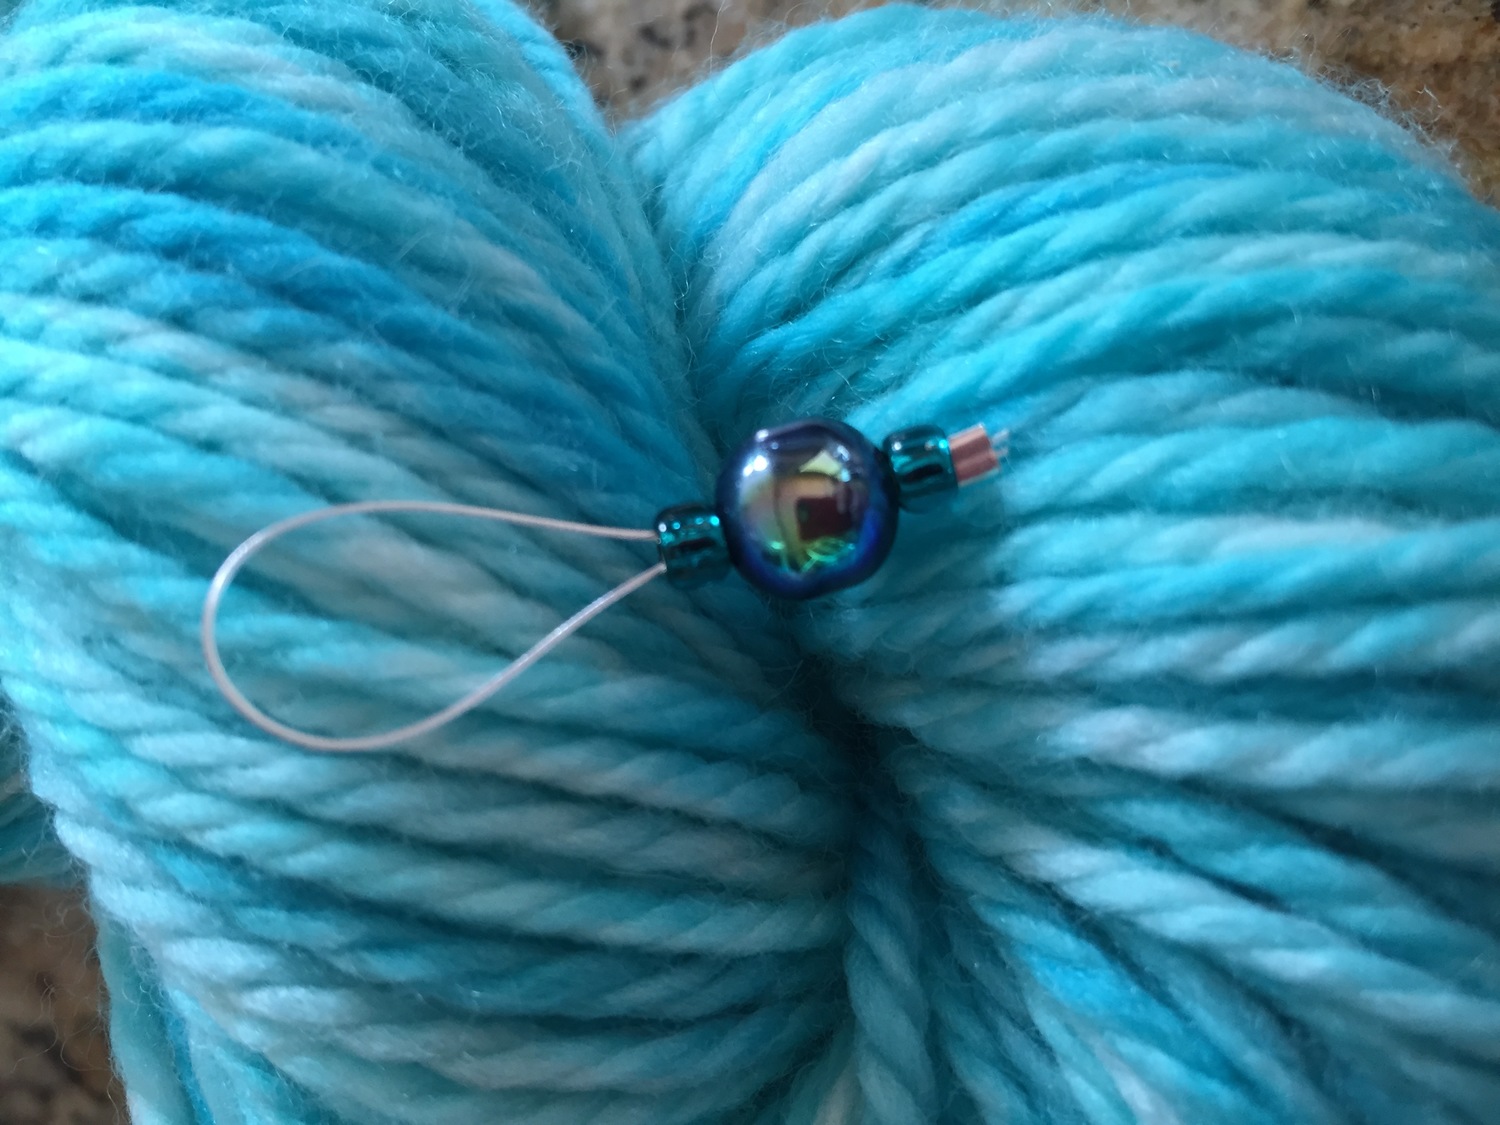 Knit Actually Podcast Episode 13!